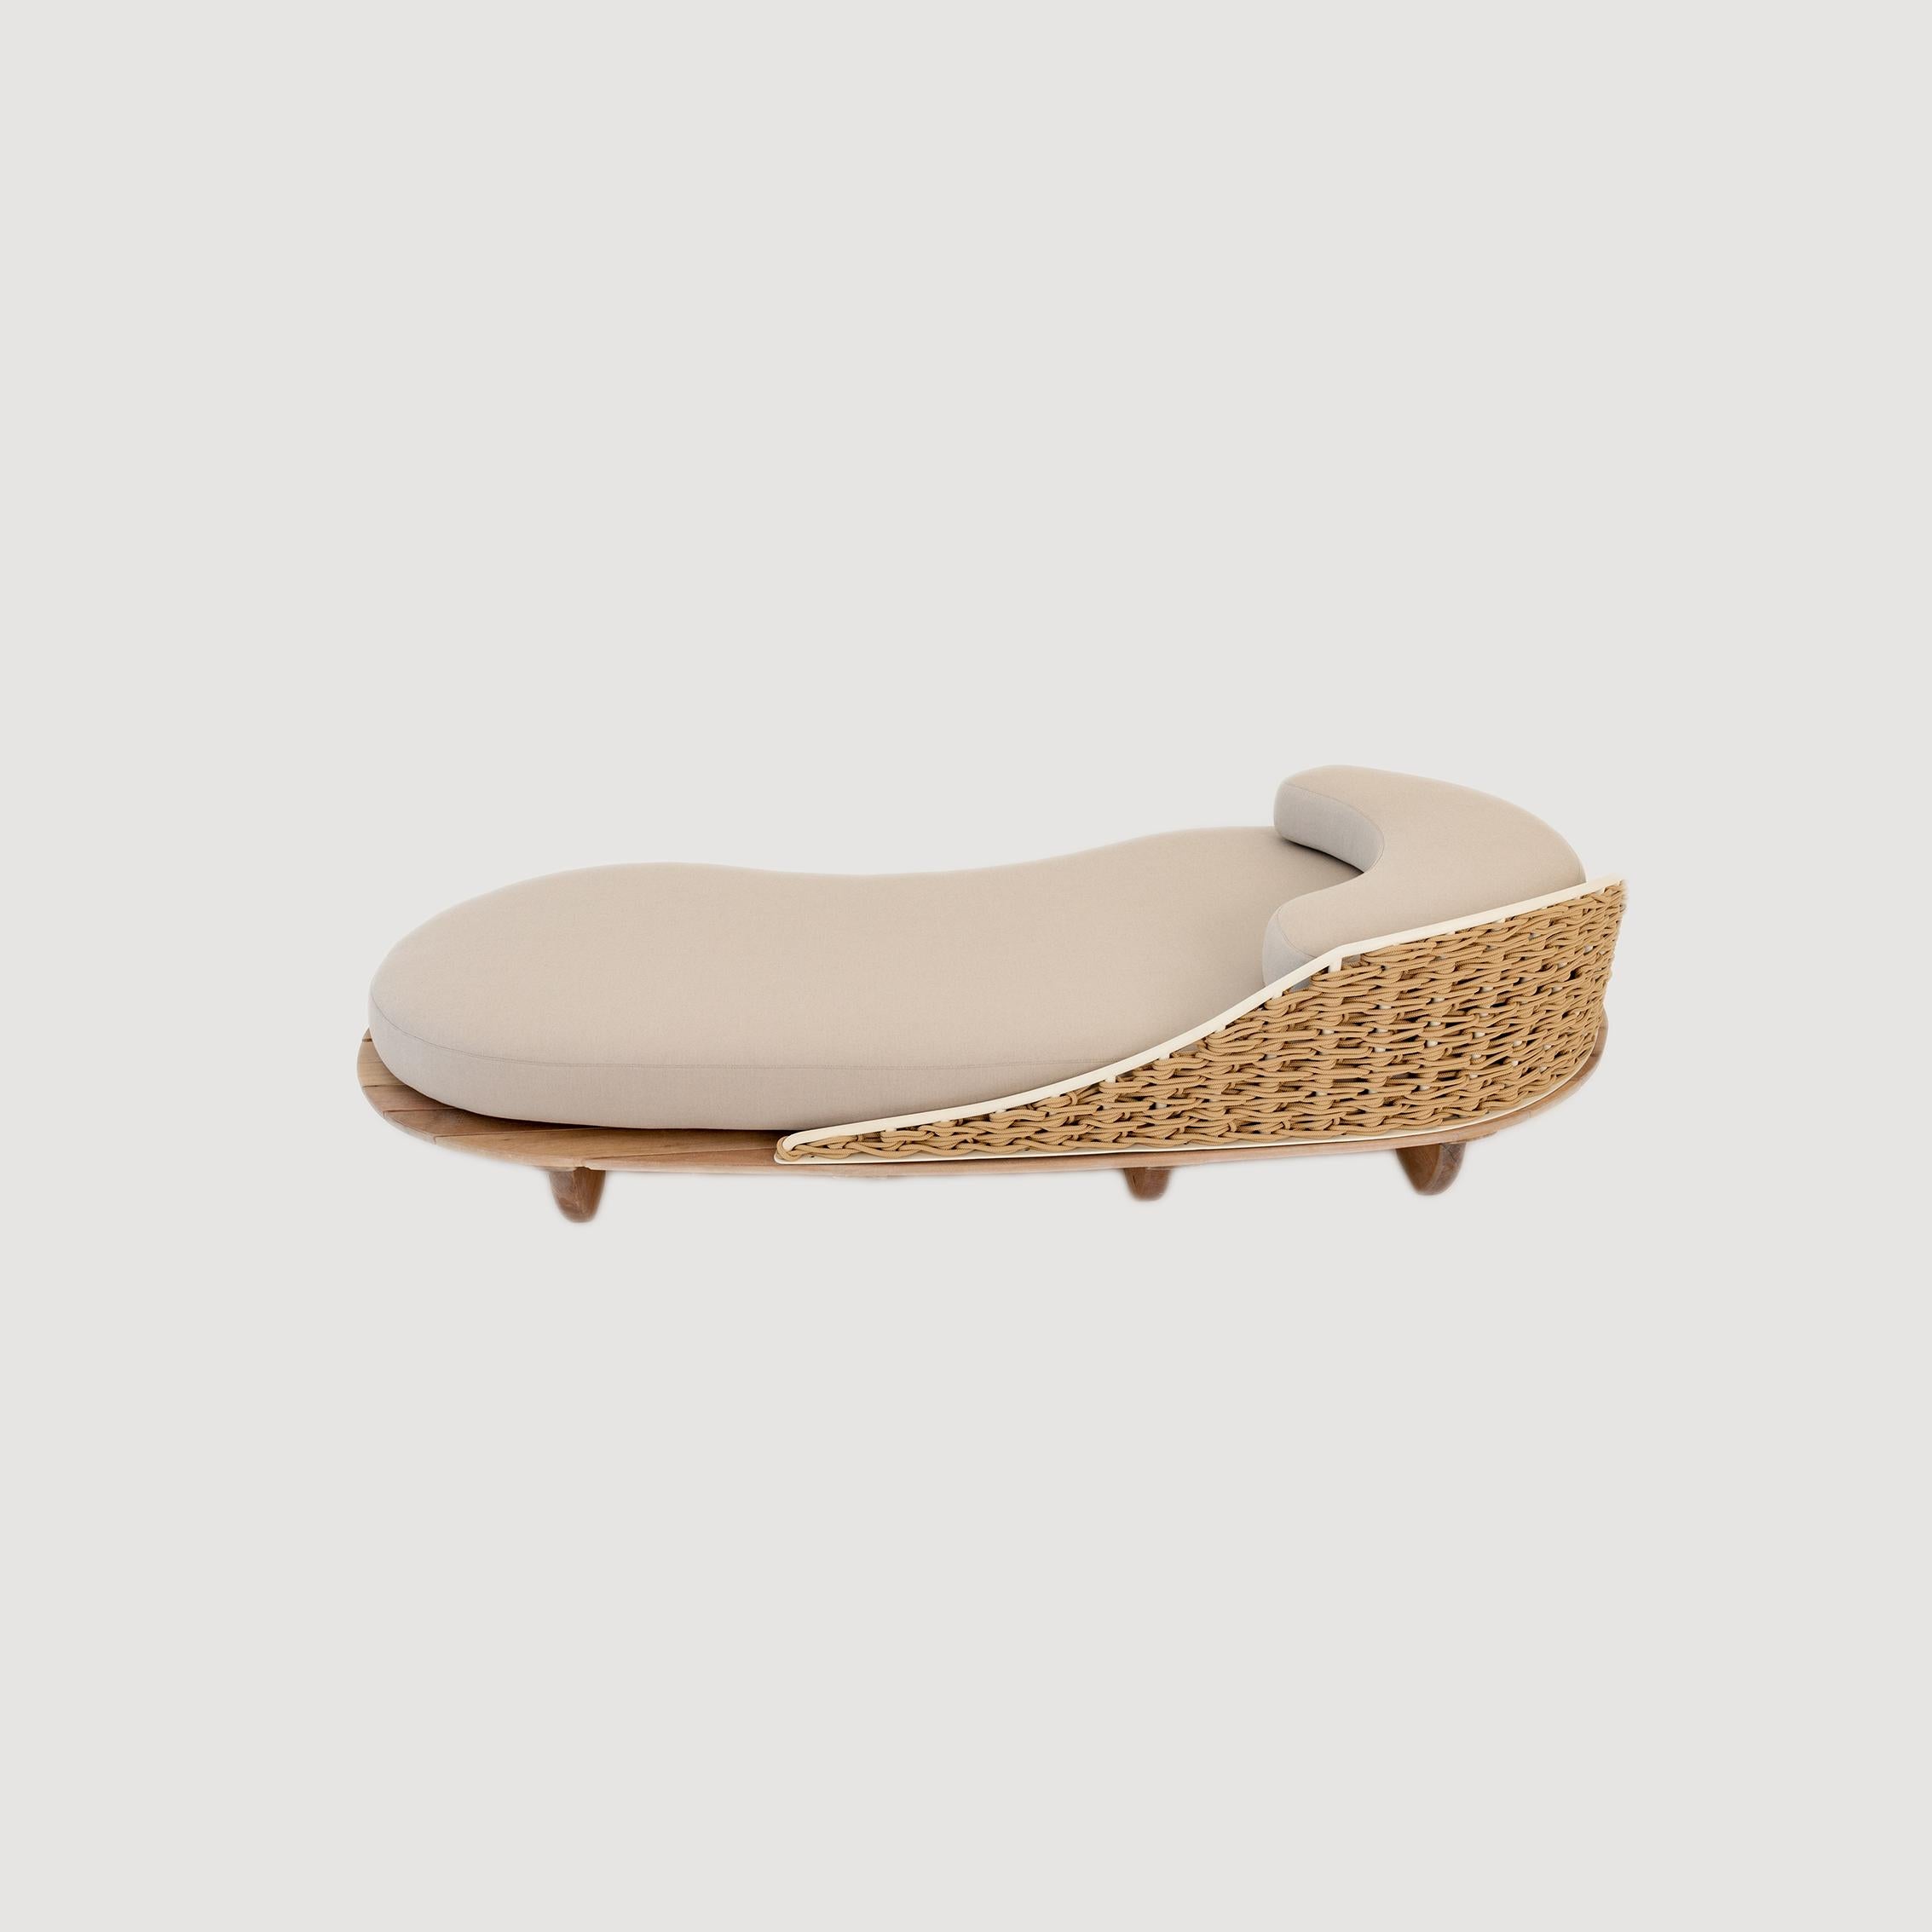 Modern The Sayari Indoor / Outdoor Daybed Chaise and Table Collection by Studio Lloyd For Sale